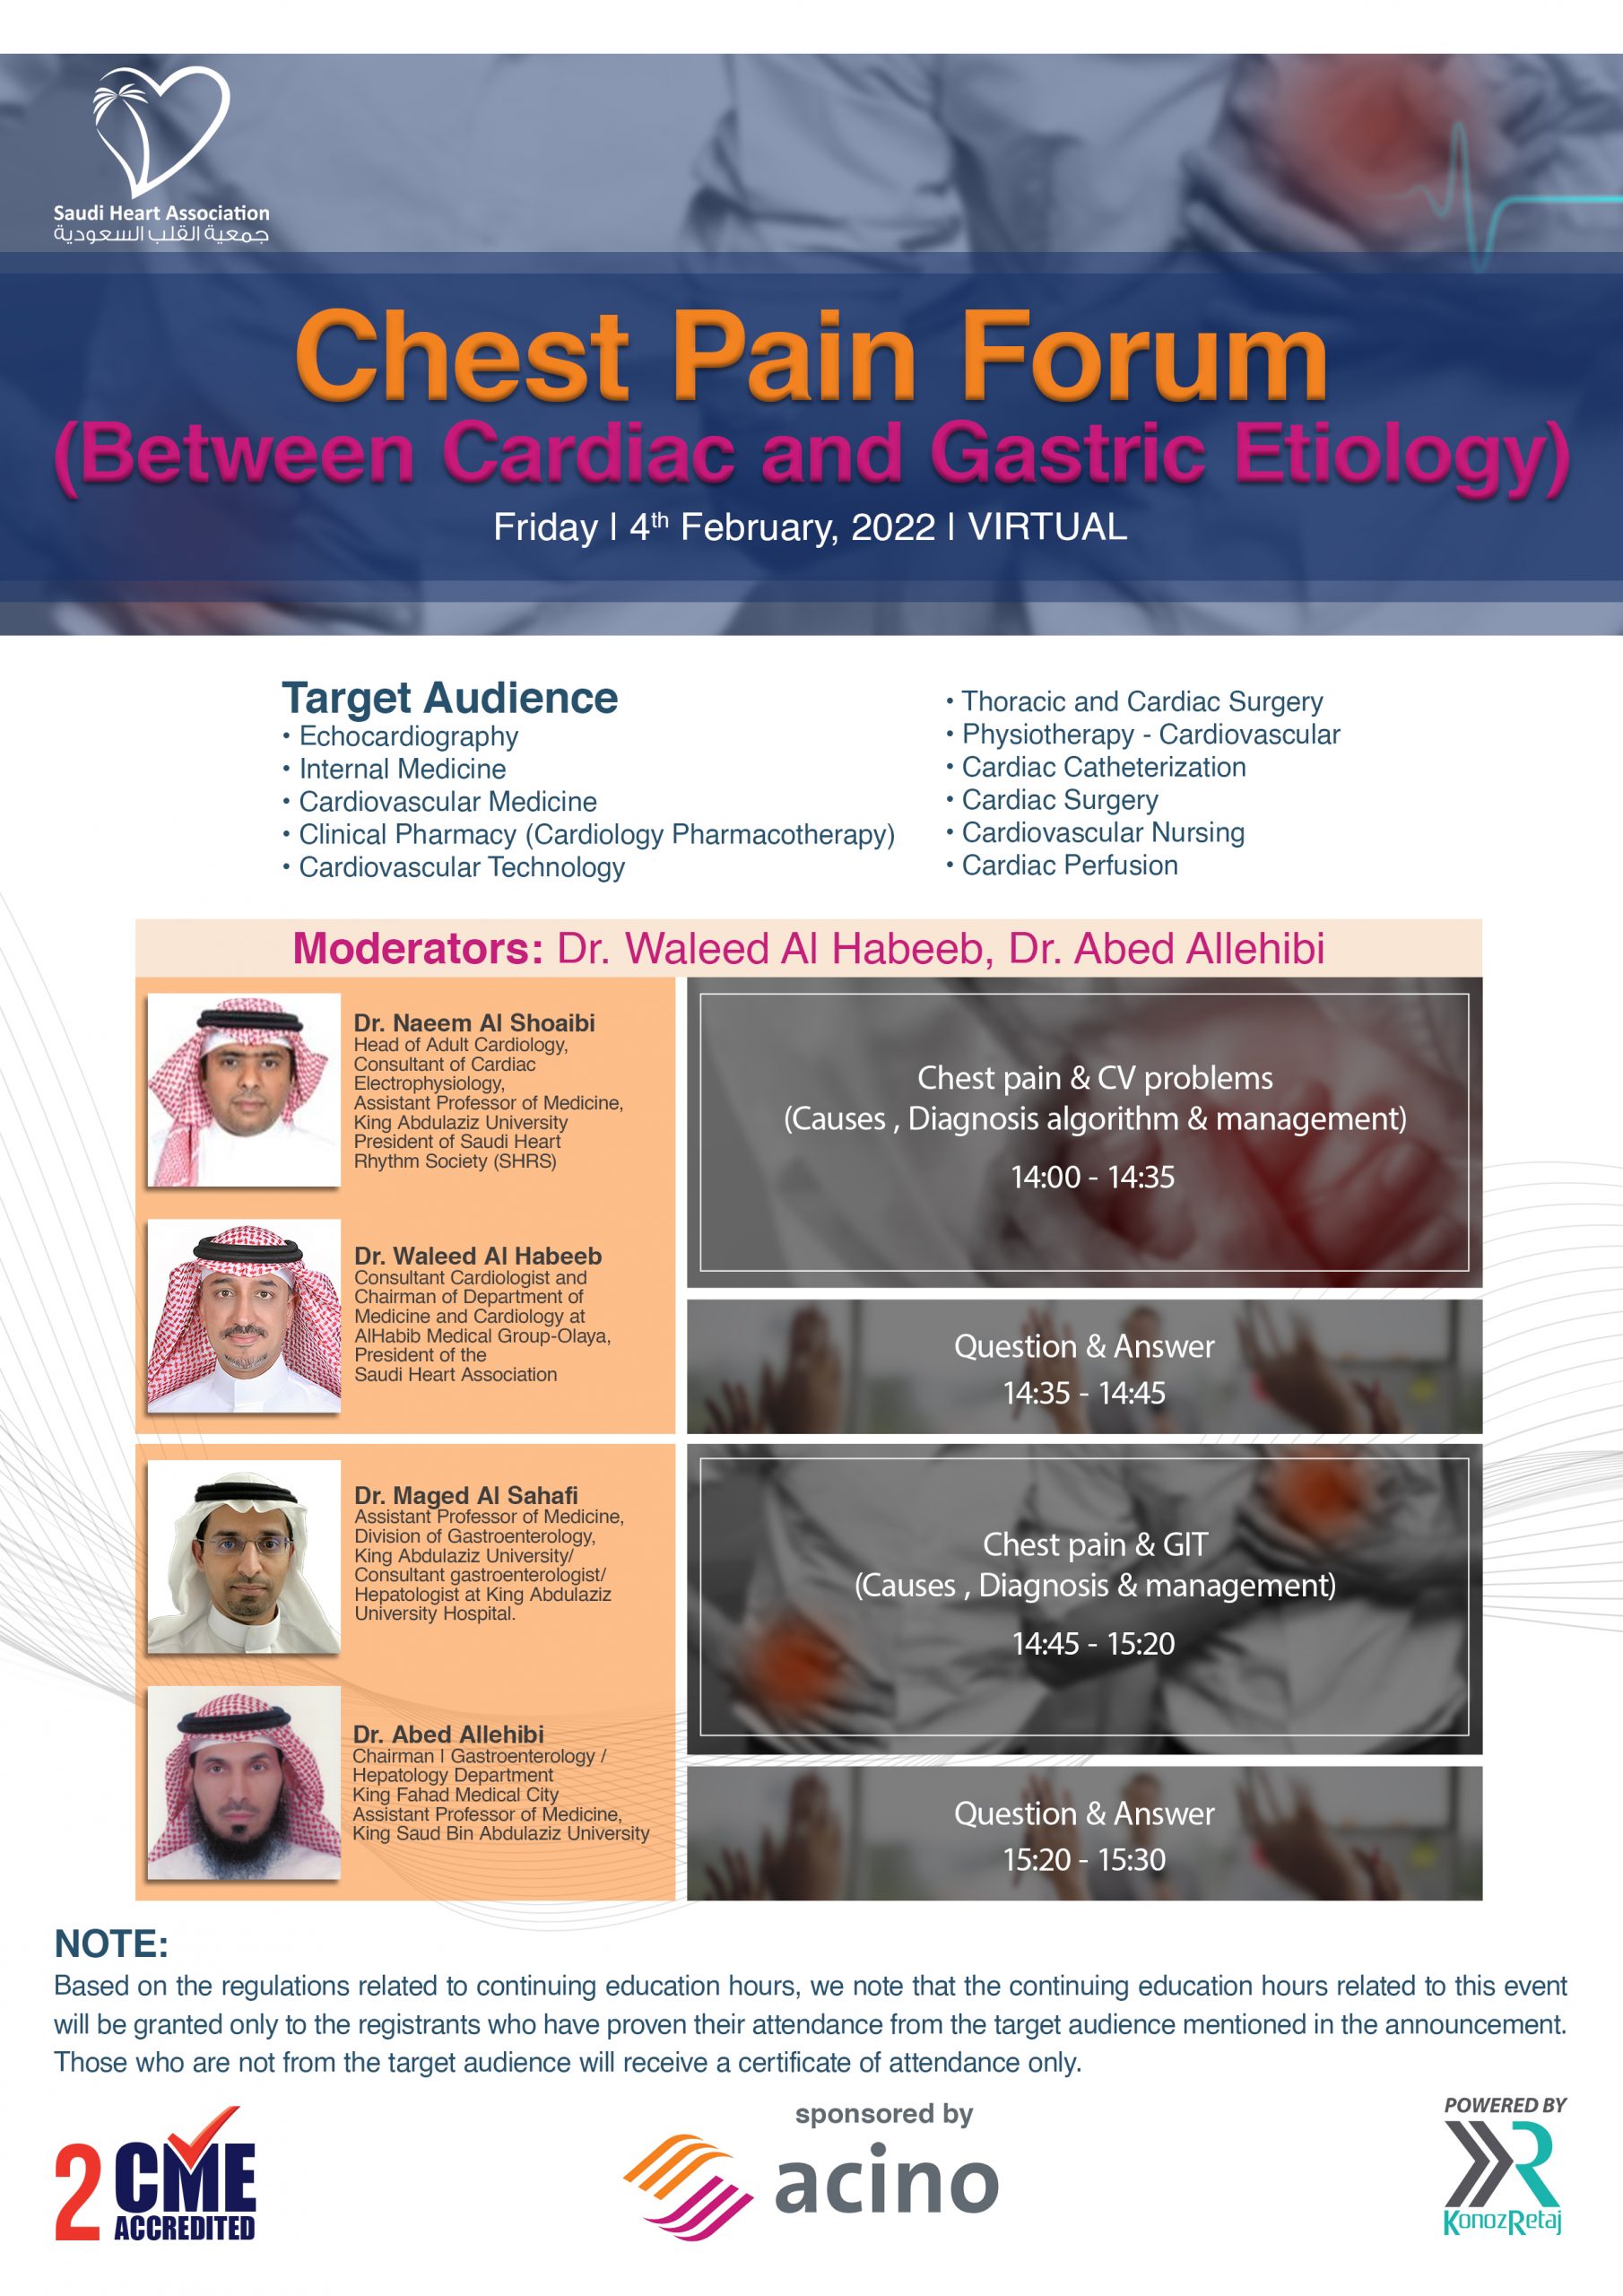 CHEST PAIN FORUM (BETWEEN CARDIAC AND GASTRIC ETIOLOGY) – February 4, 2022